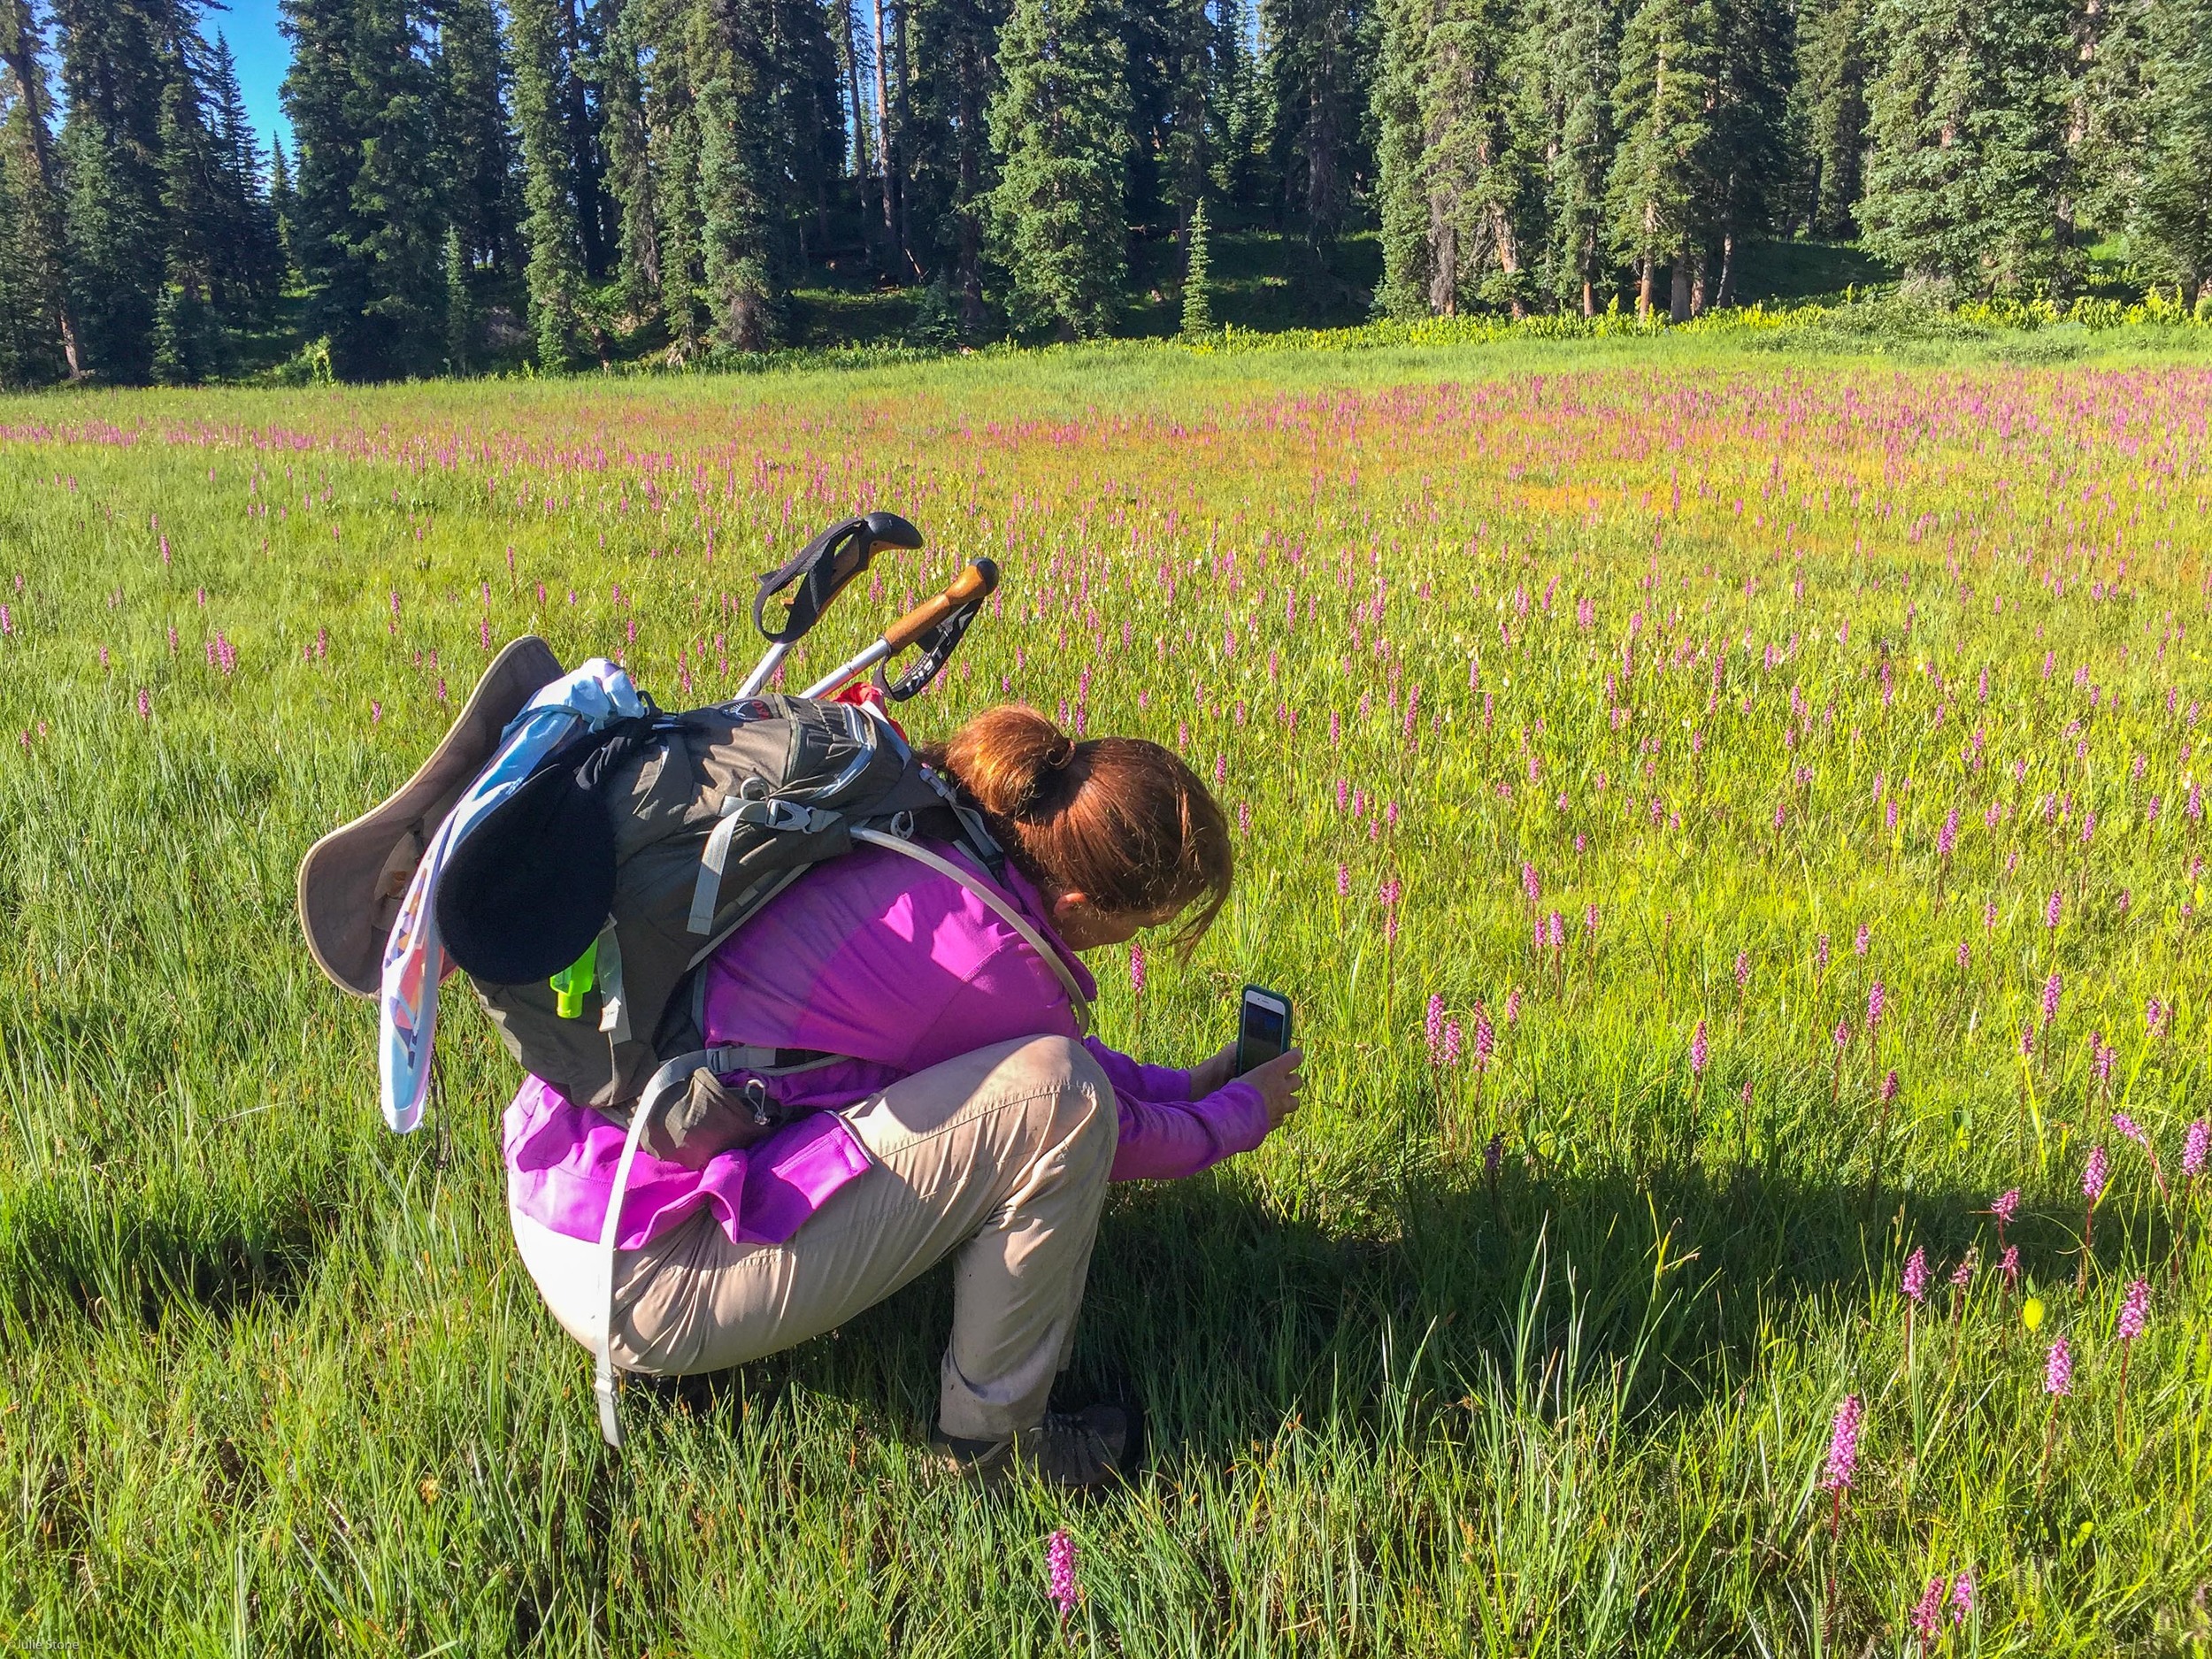 Gina getting the shot of the pink elephant flowers